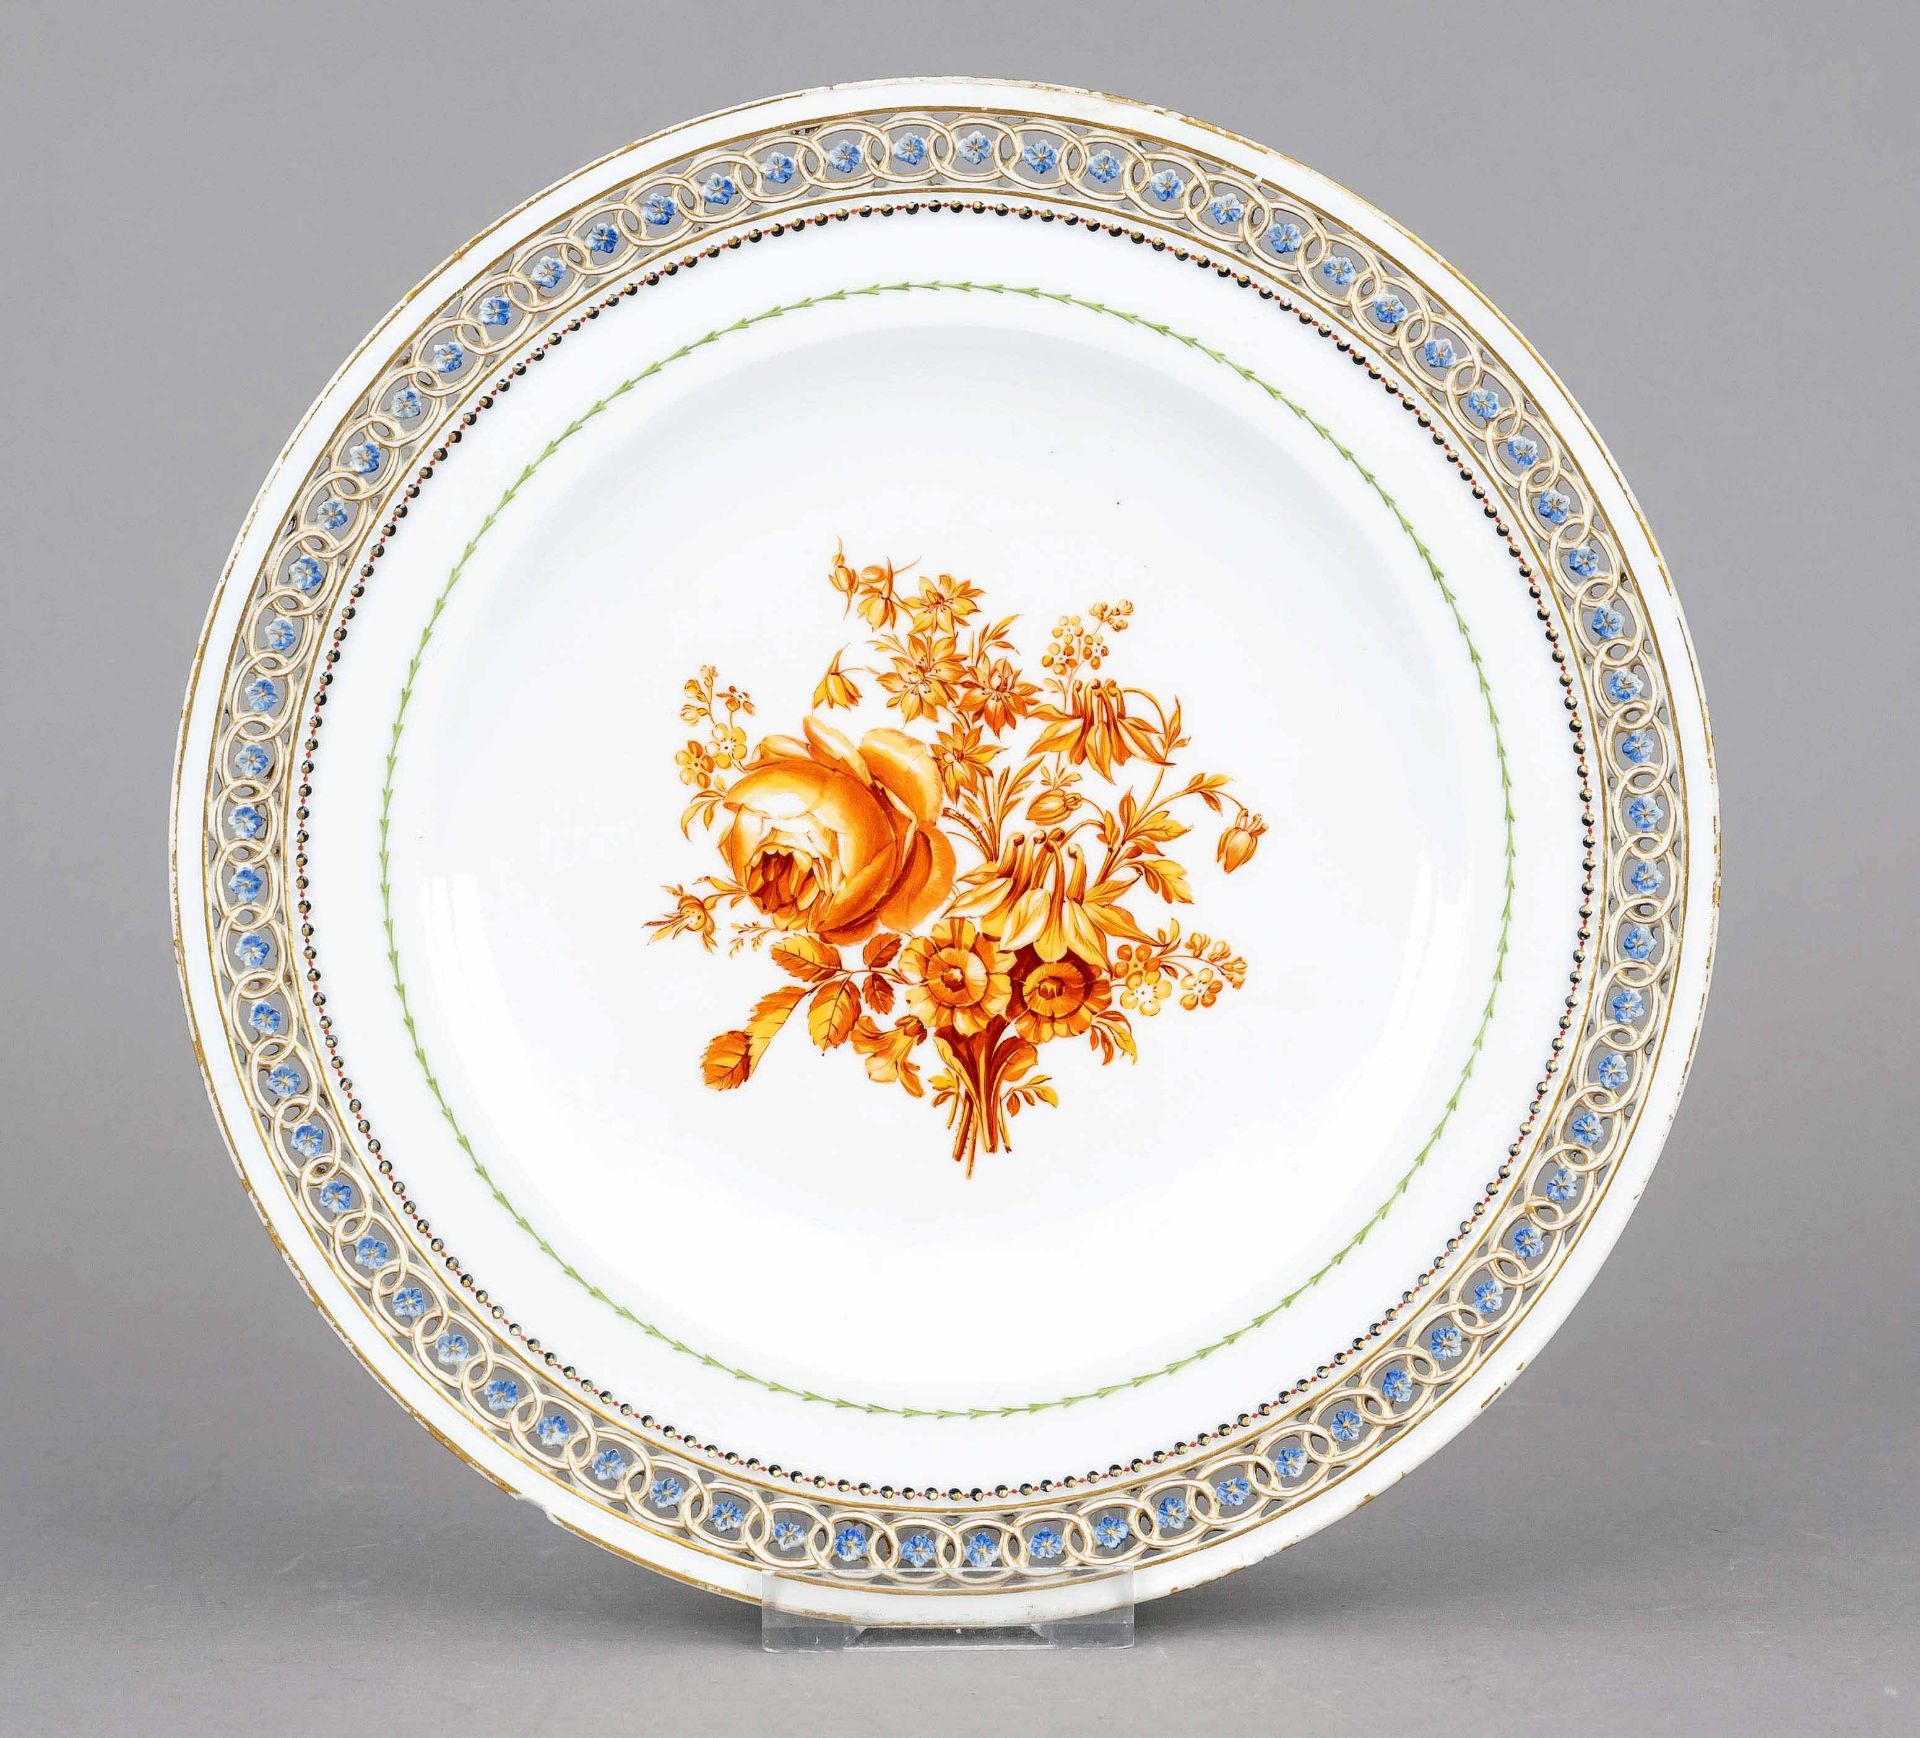 Flat plate, Meissen, Marcolini mark 1784-1780, 1st choice, in the mirror flower painting in